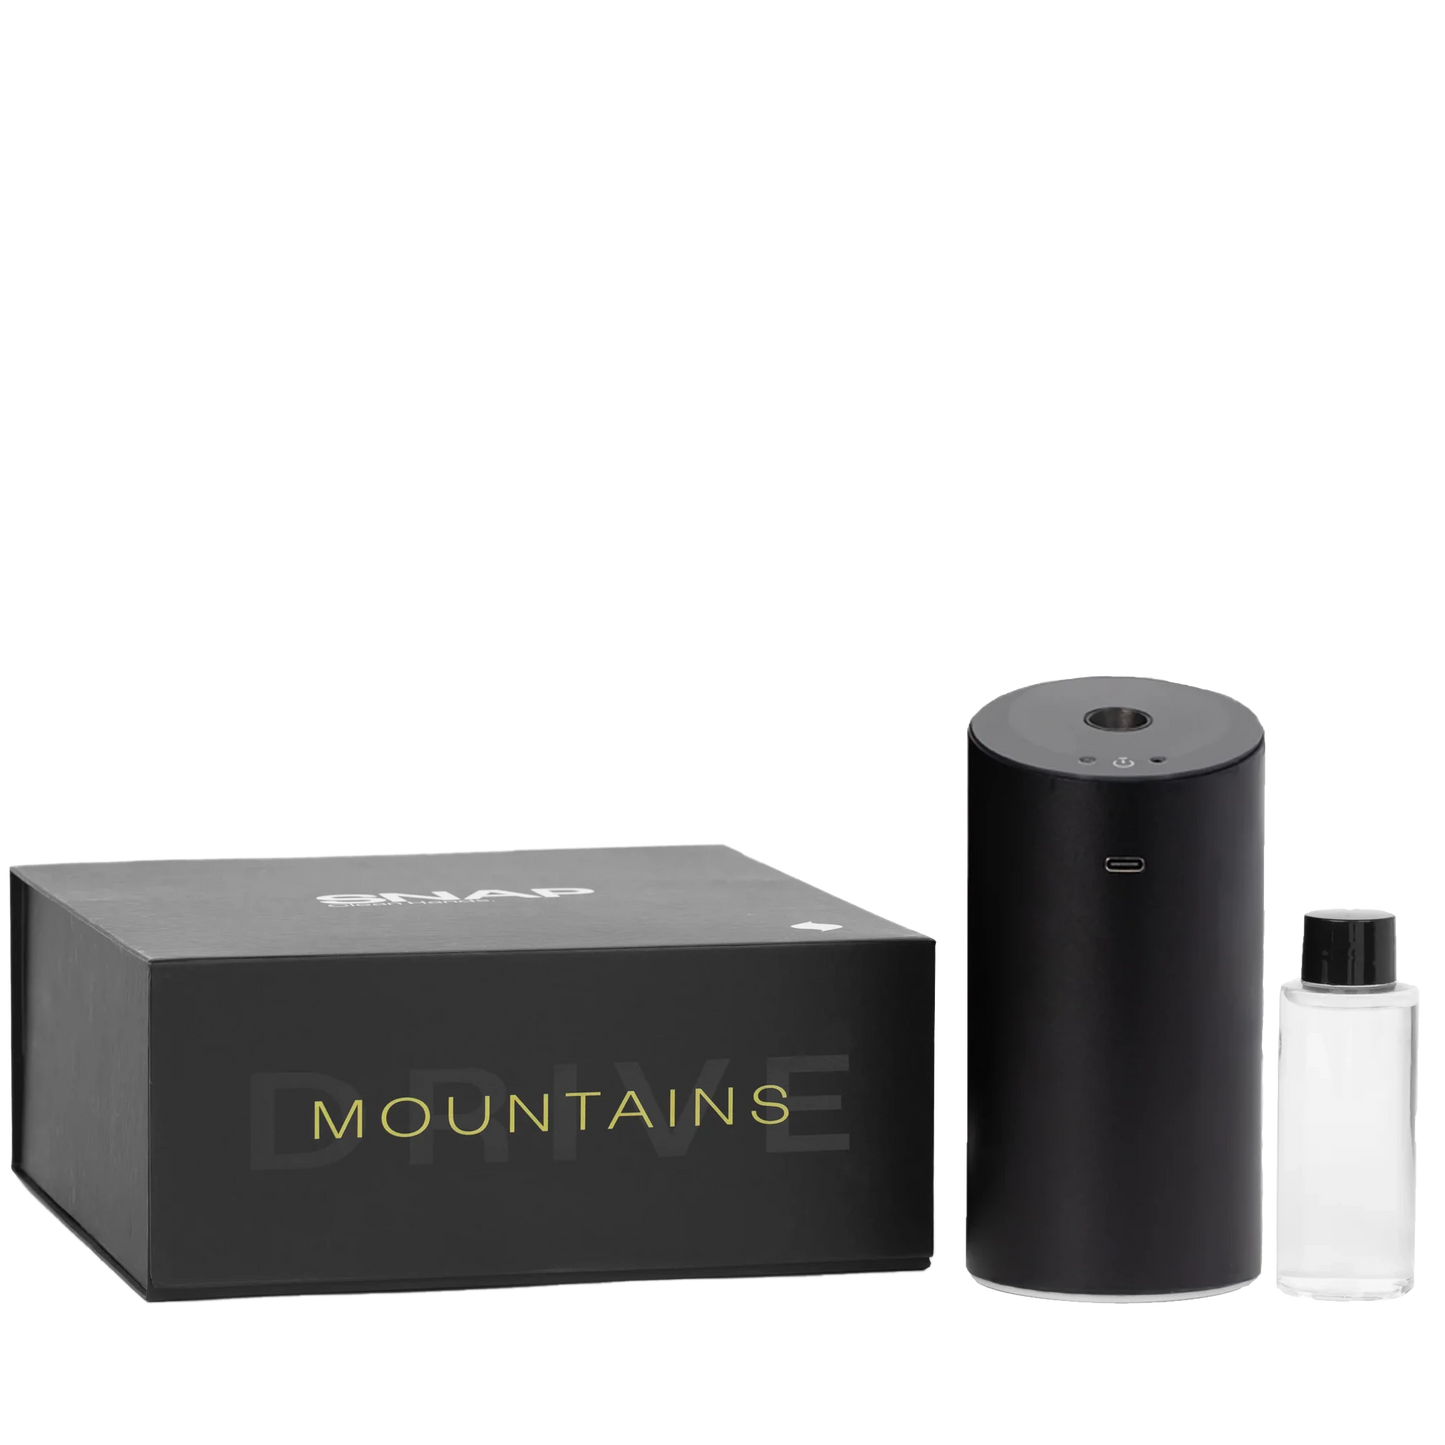 Mountains Drive Touchless Mist Sanitizer Device